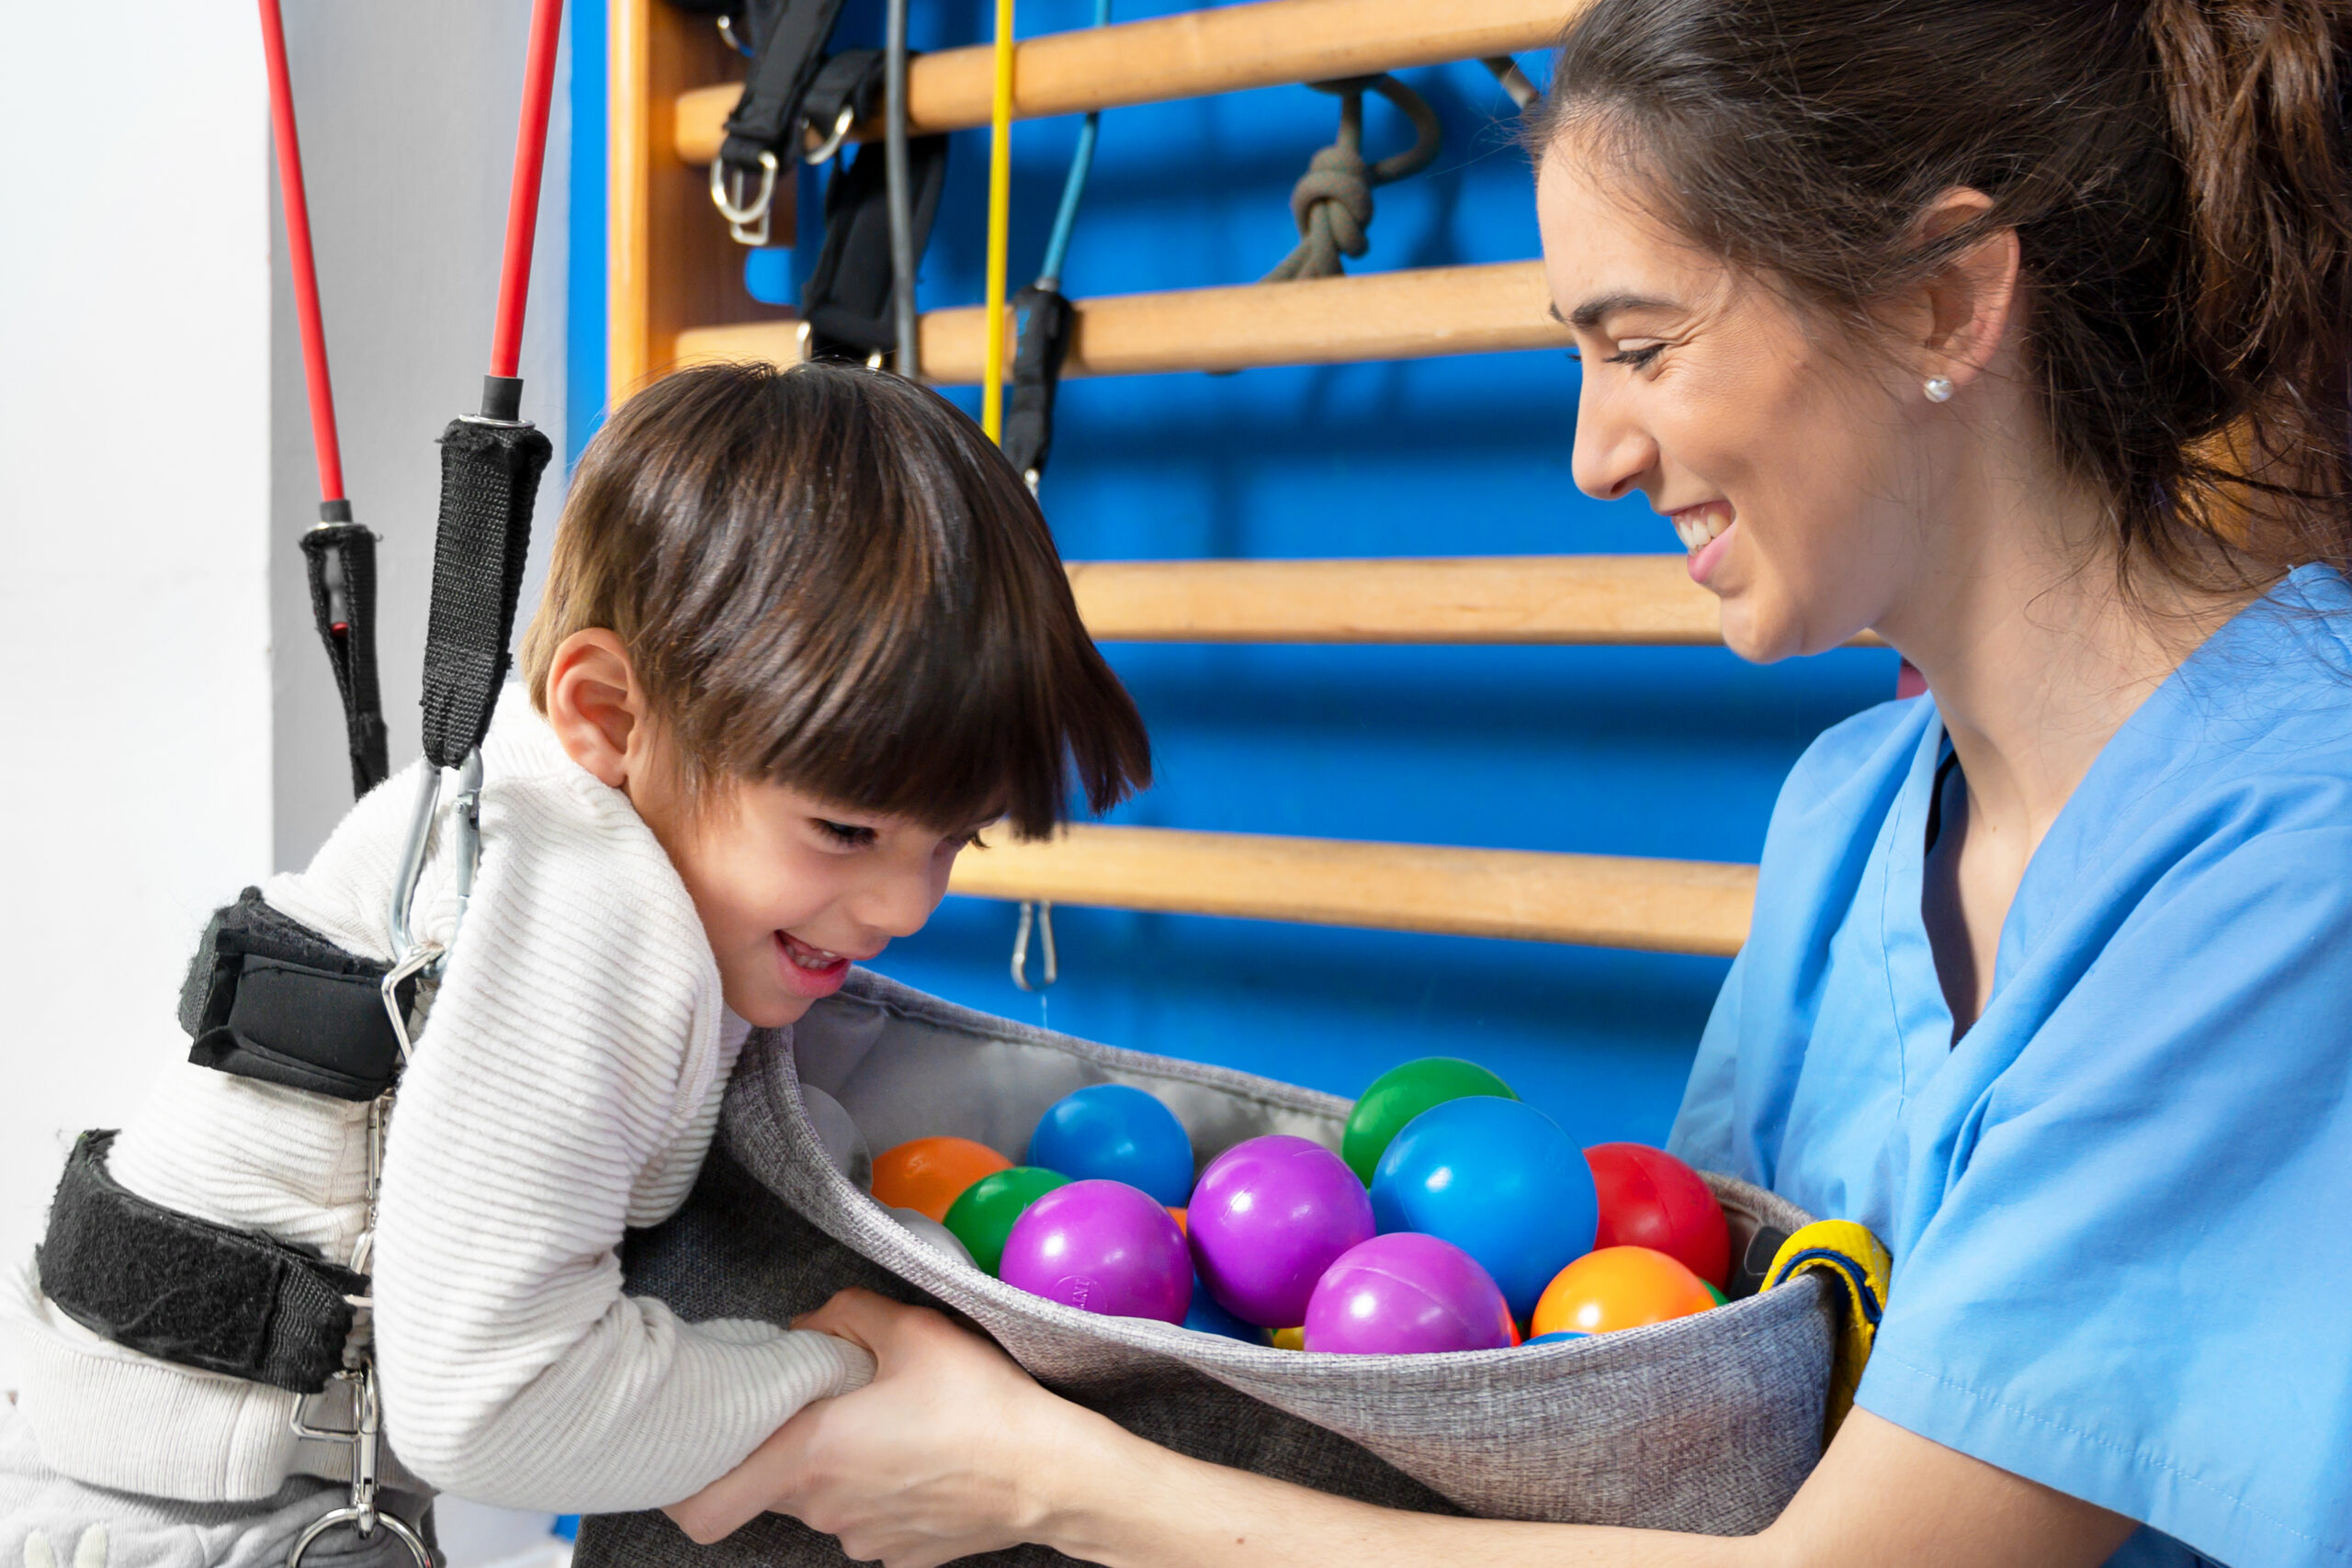 Occupational therapy is a powerful tool that can help people with disabilities live more independent and fulfilling lives.